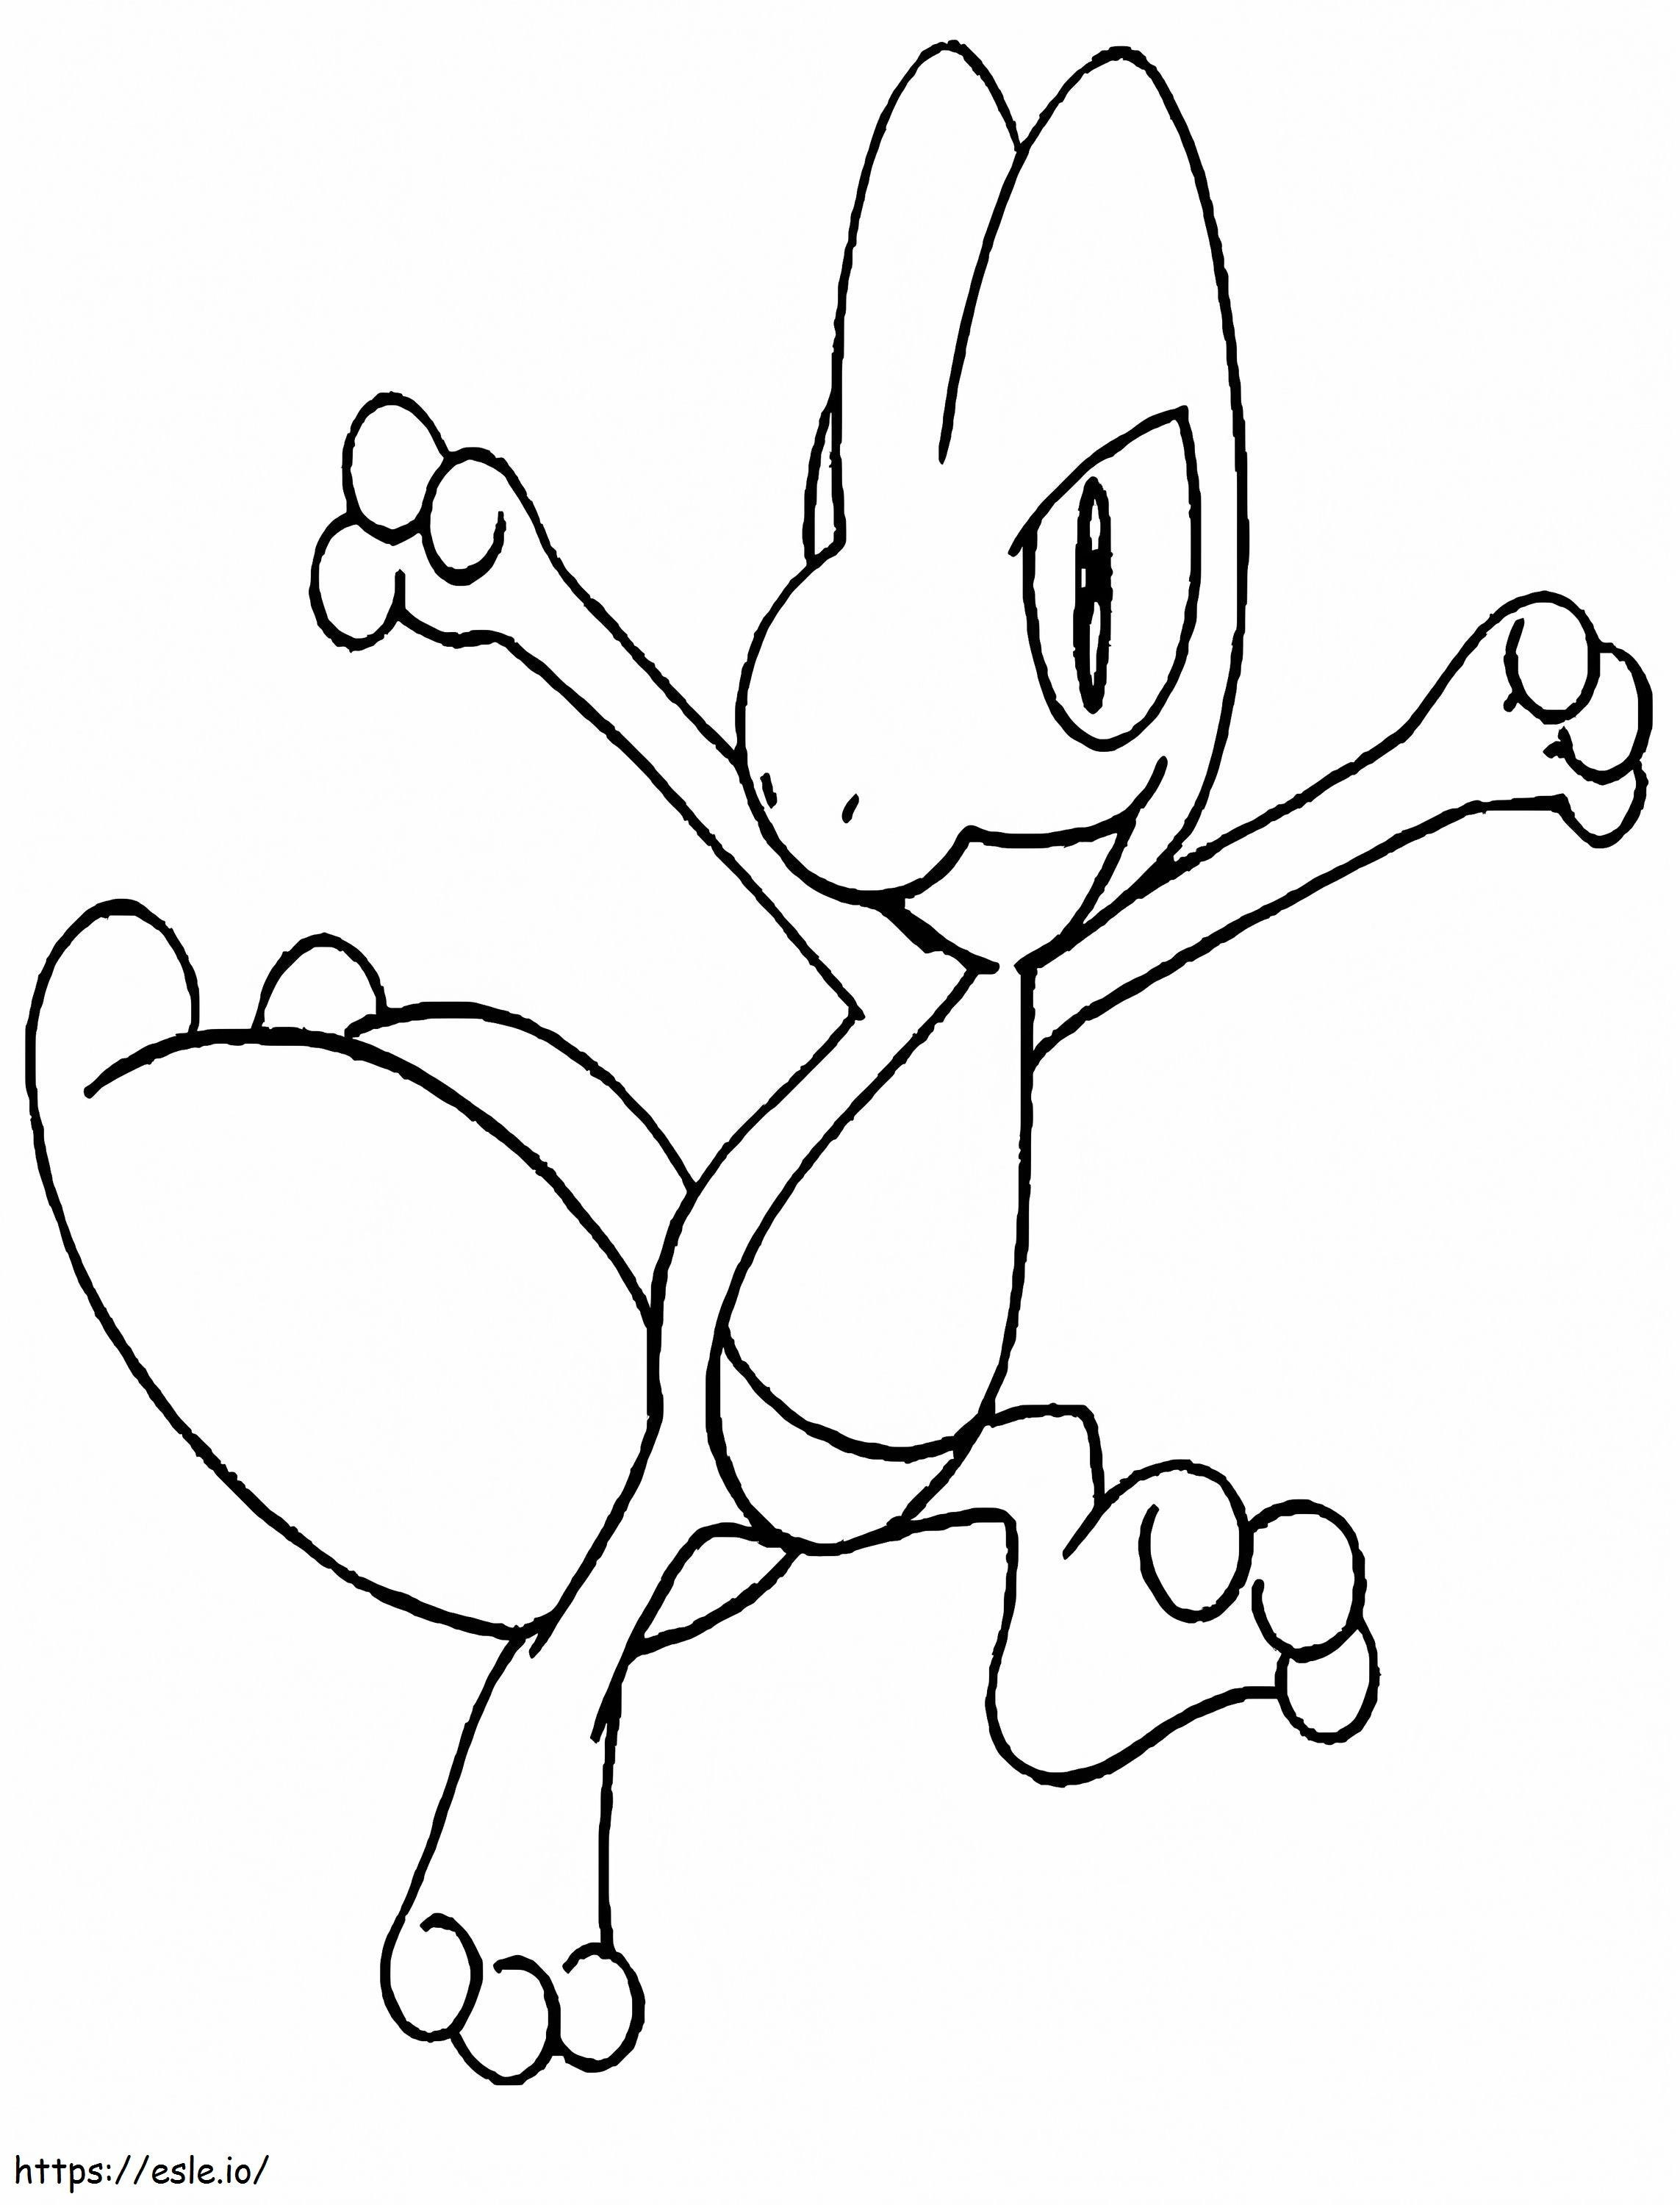 Awesome Treecko coloring page